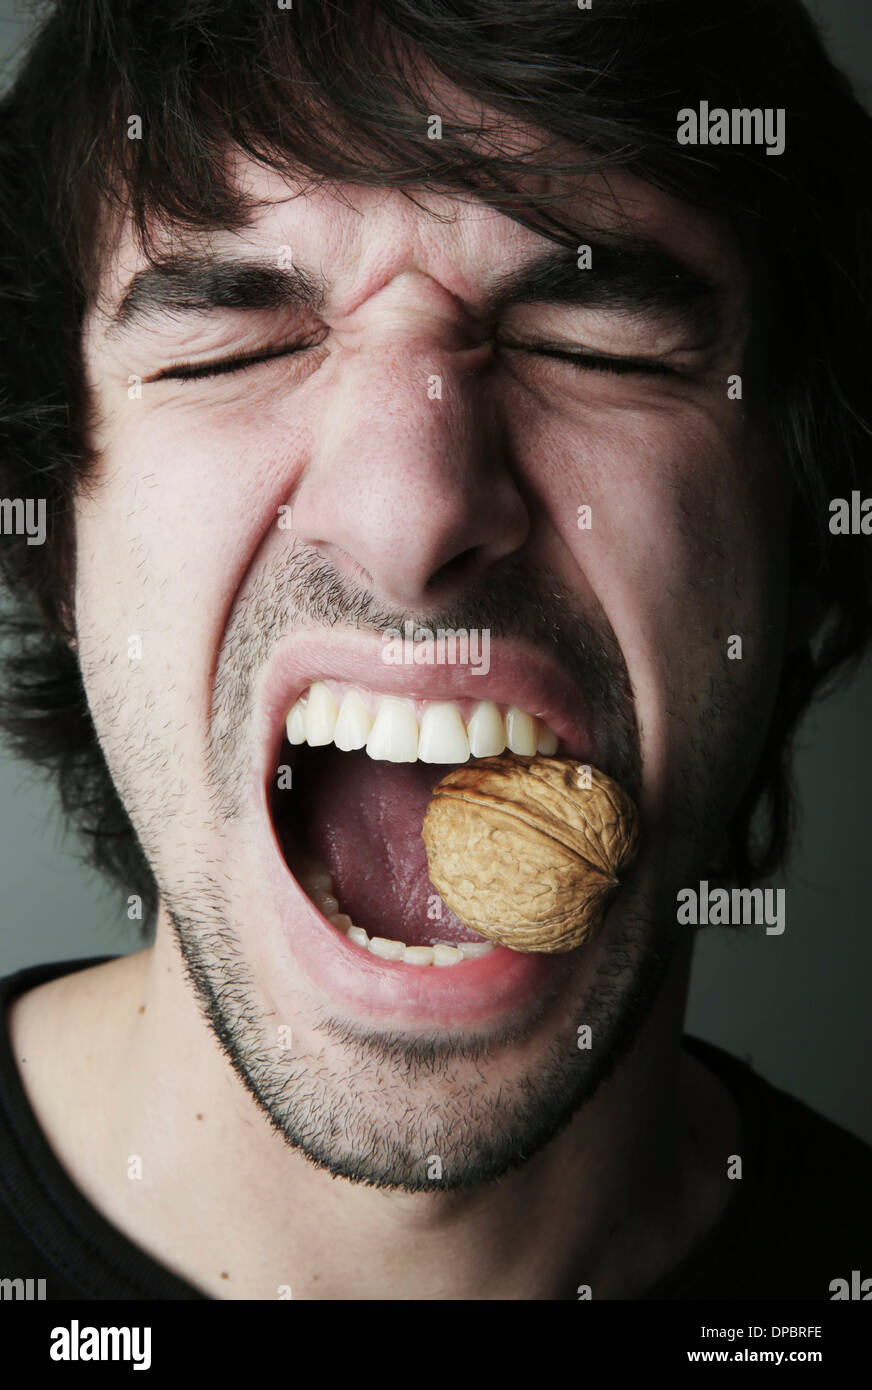 Portrait of young man trying to crack a walnut with his teeth, studio shot Stock Photo